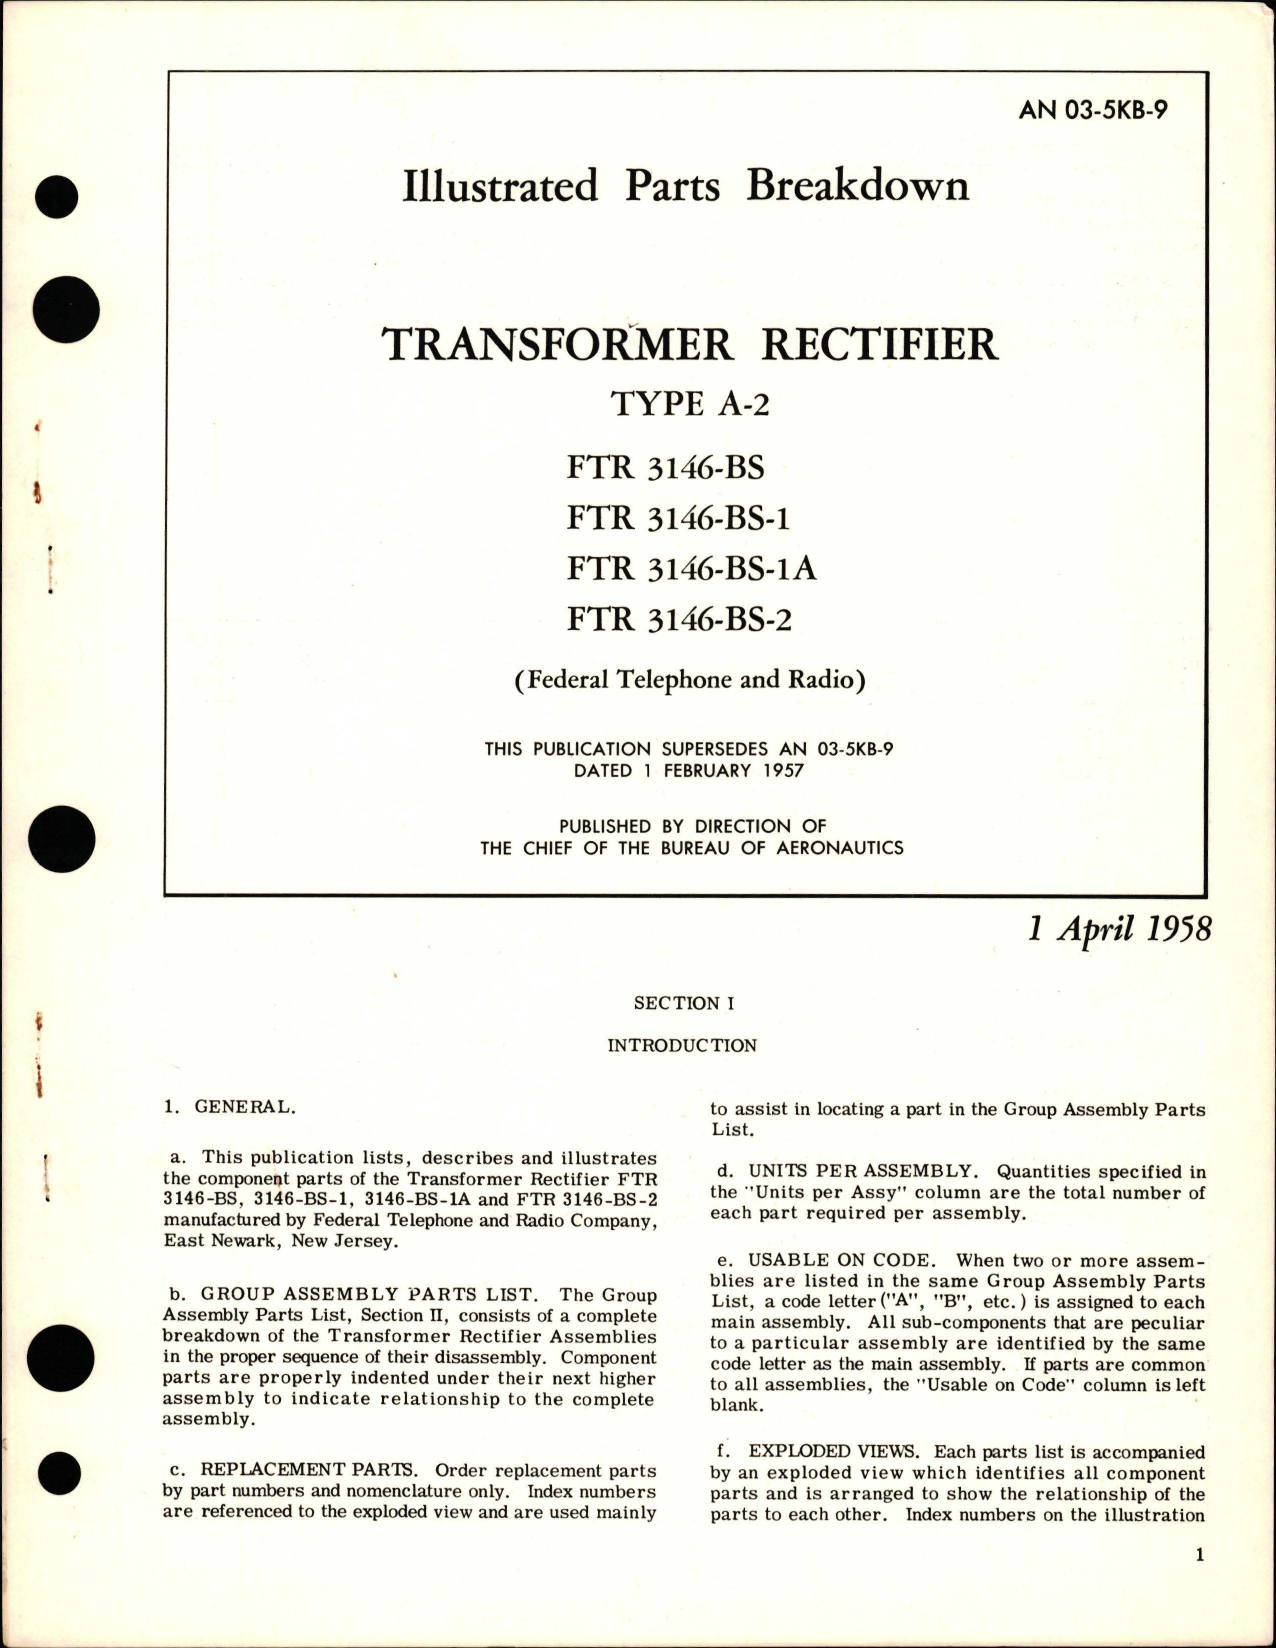 Sample page 1 from AirCorps Library document: Illustrated Parts Breakdown for Transformer Rectifier - Type A-2